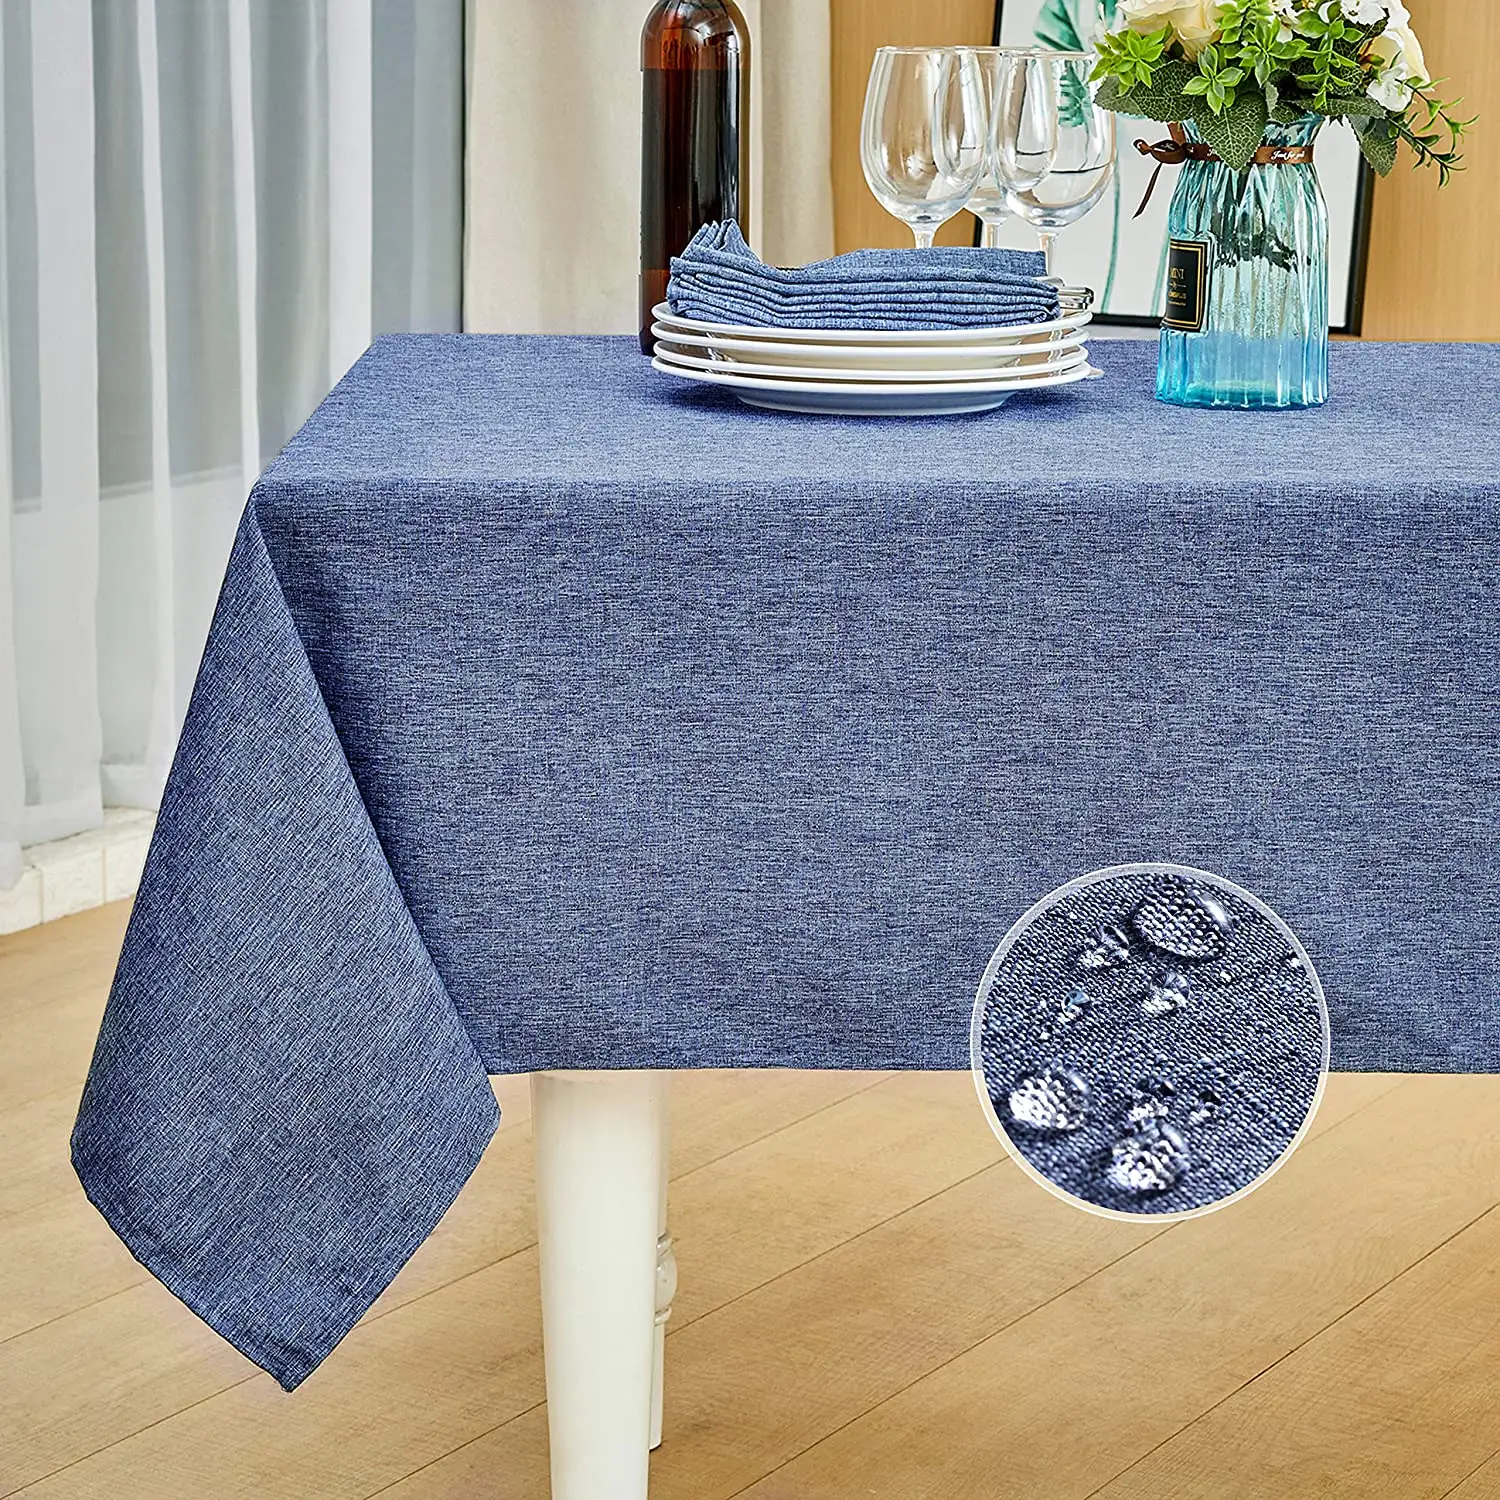 Rectangle Table Cloth Linen Farmhouse Tablecloth Waterproof Anti-Shrink Soft and Wrinkle Resistant Decorative Fabric Table Cover